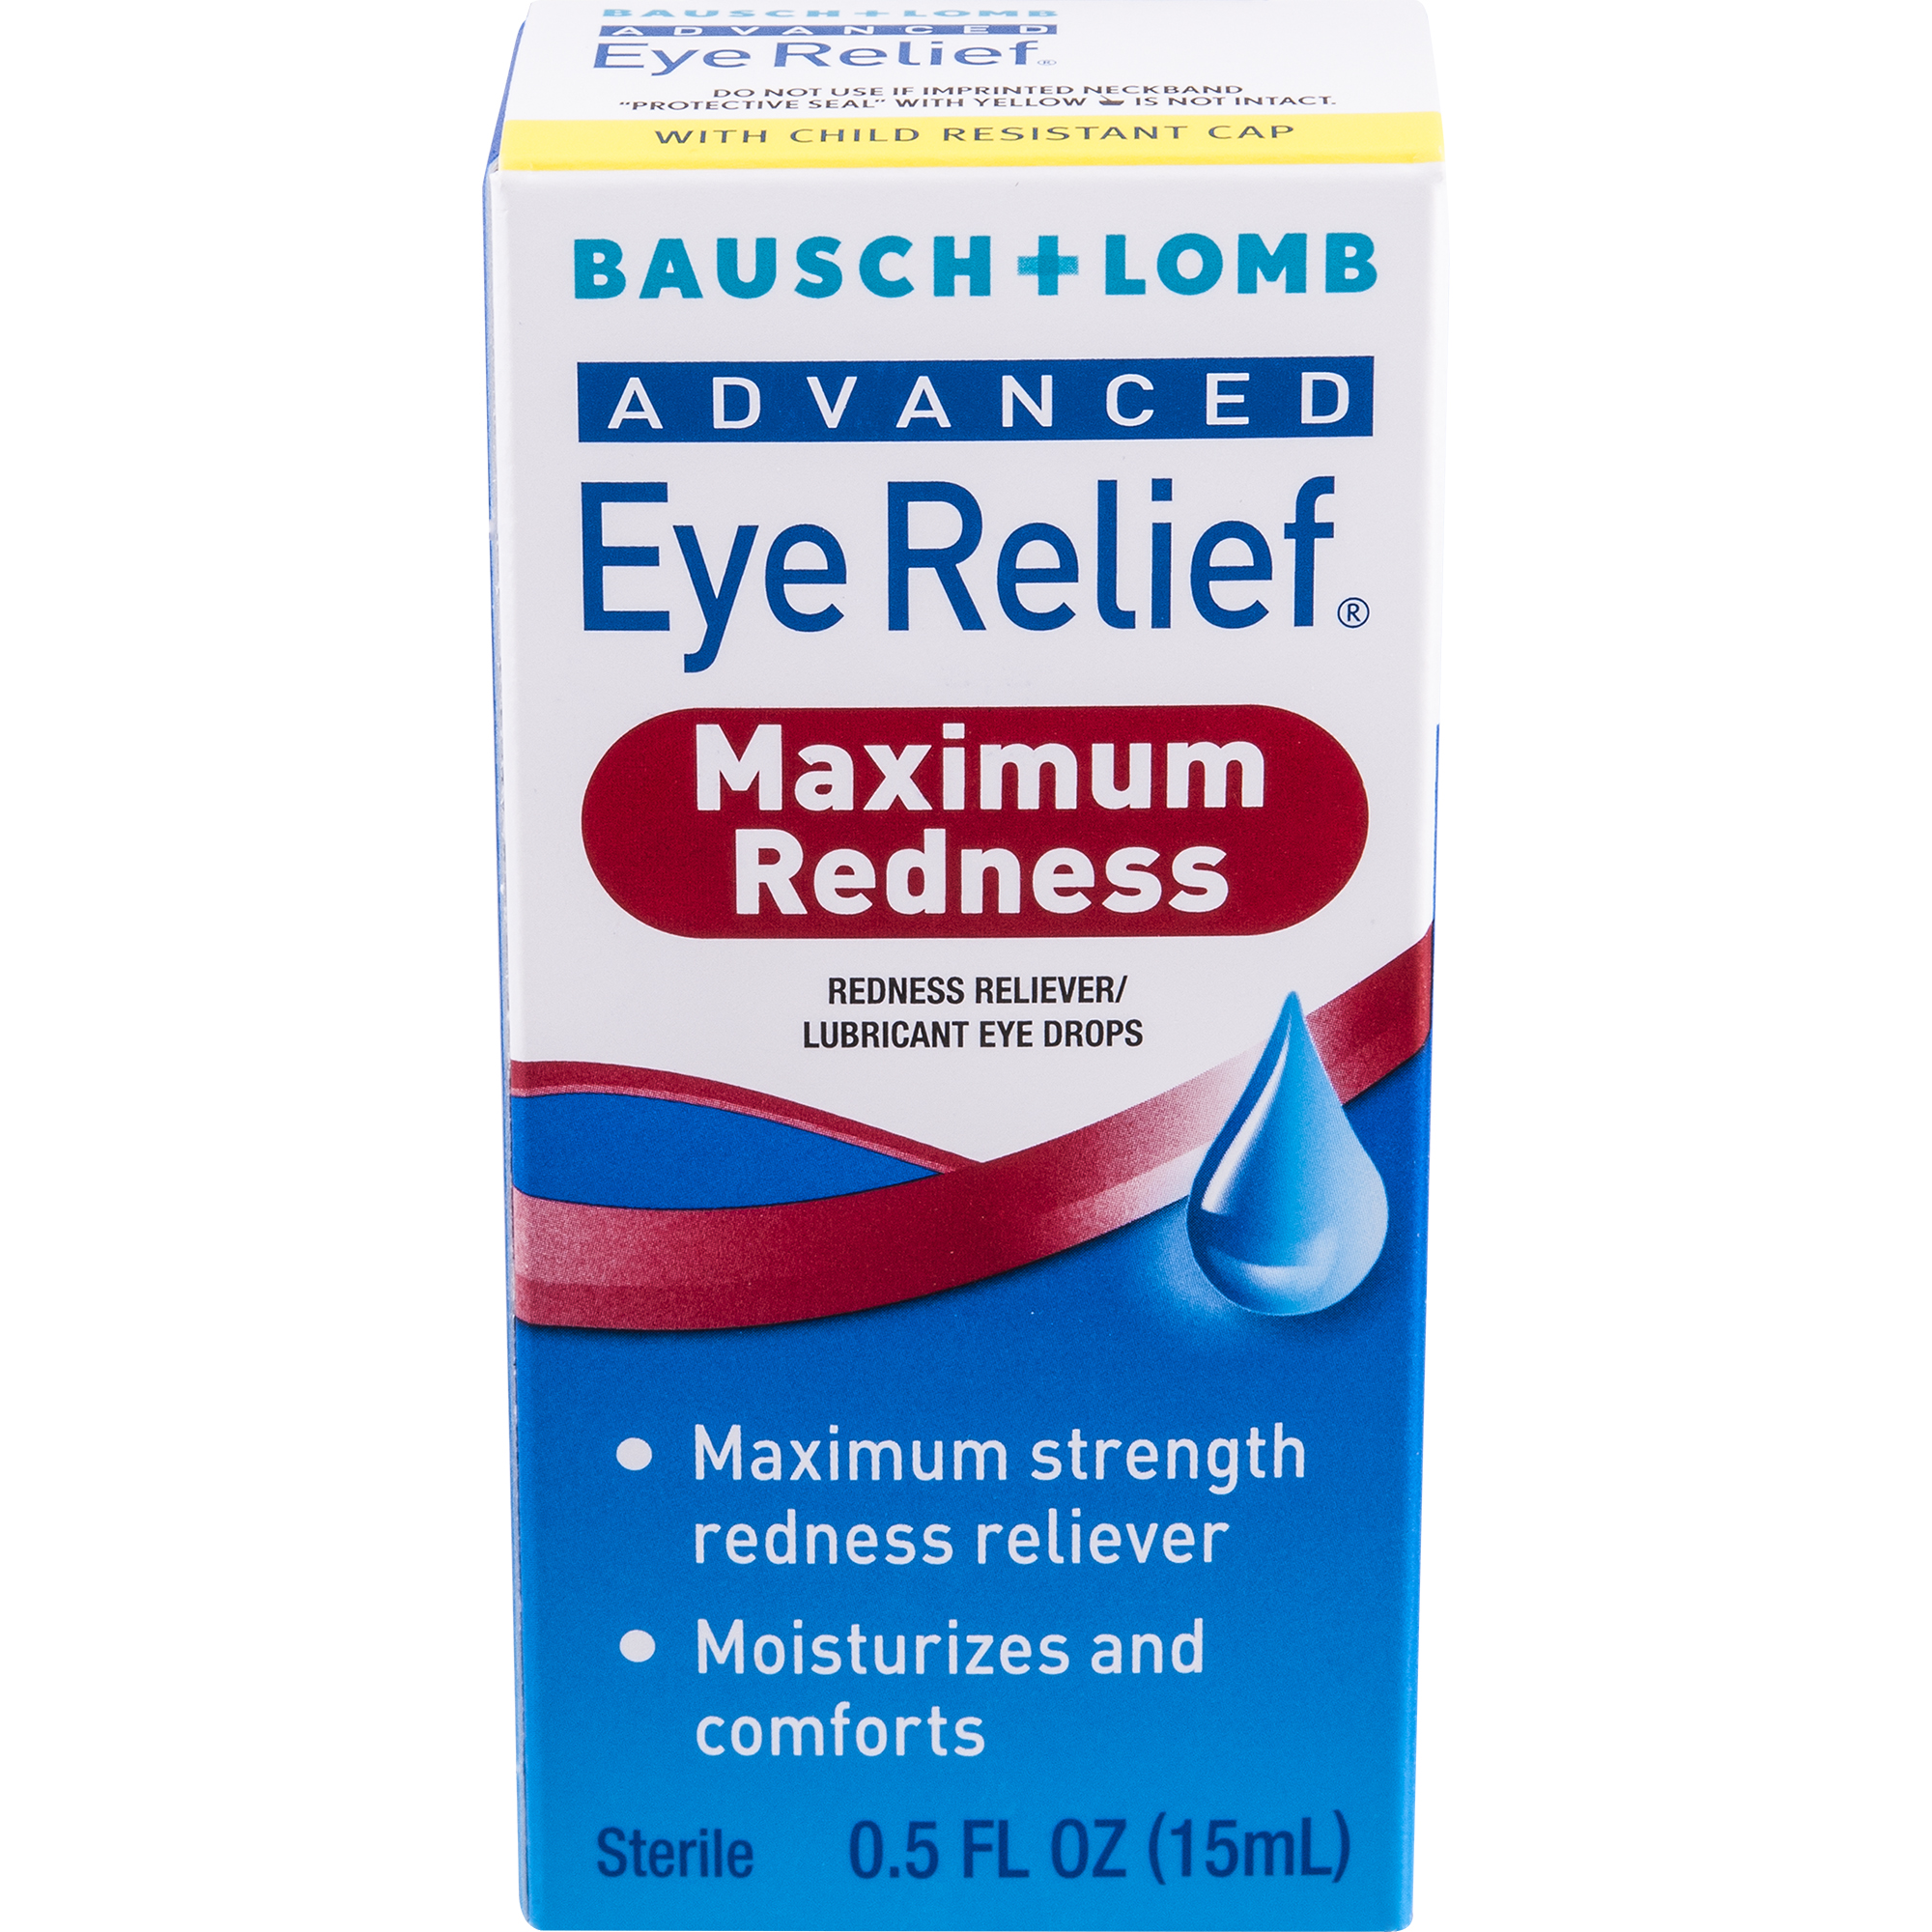 Bausch & Lomb Advanced Eye Relief Maximum Relief Lubricant/Redness Reliever Eye Drops, .5 oz - image 1 of 8